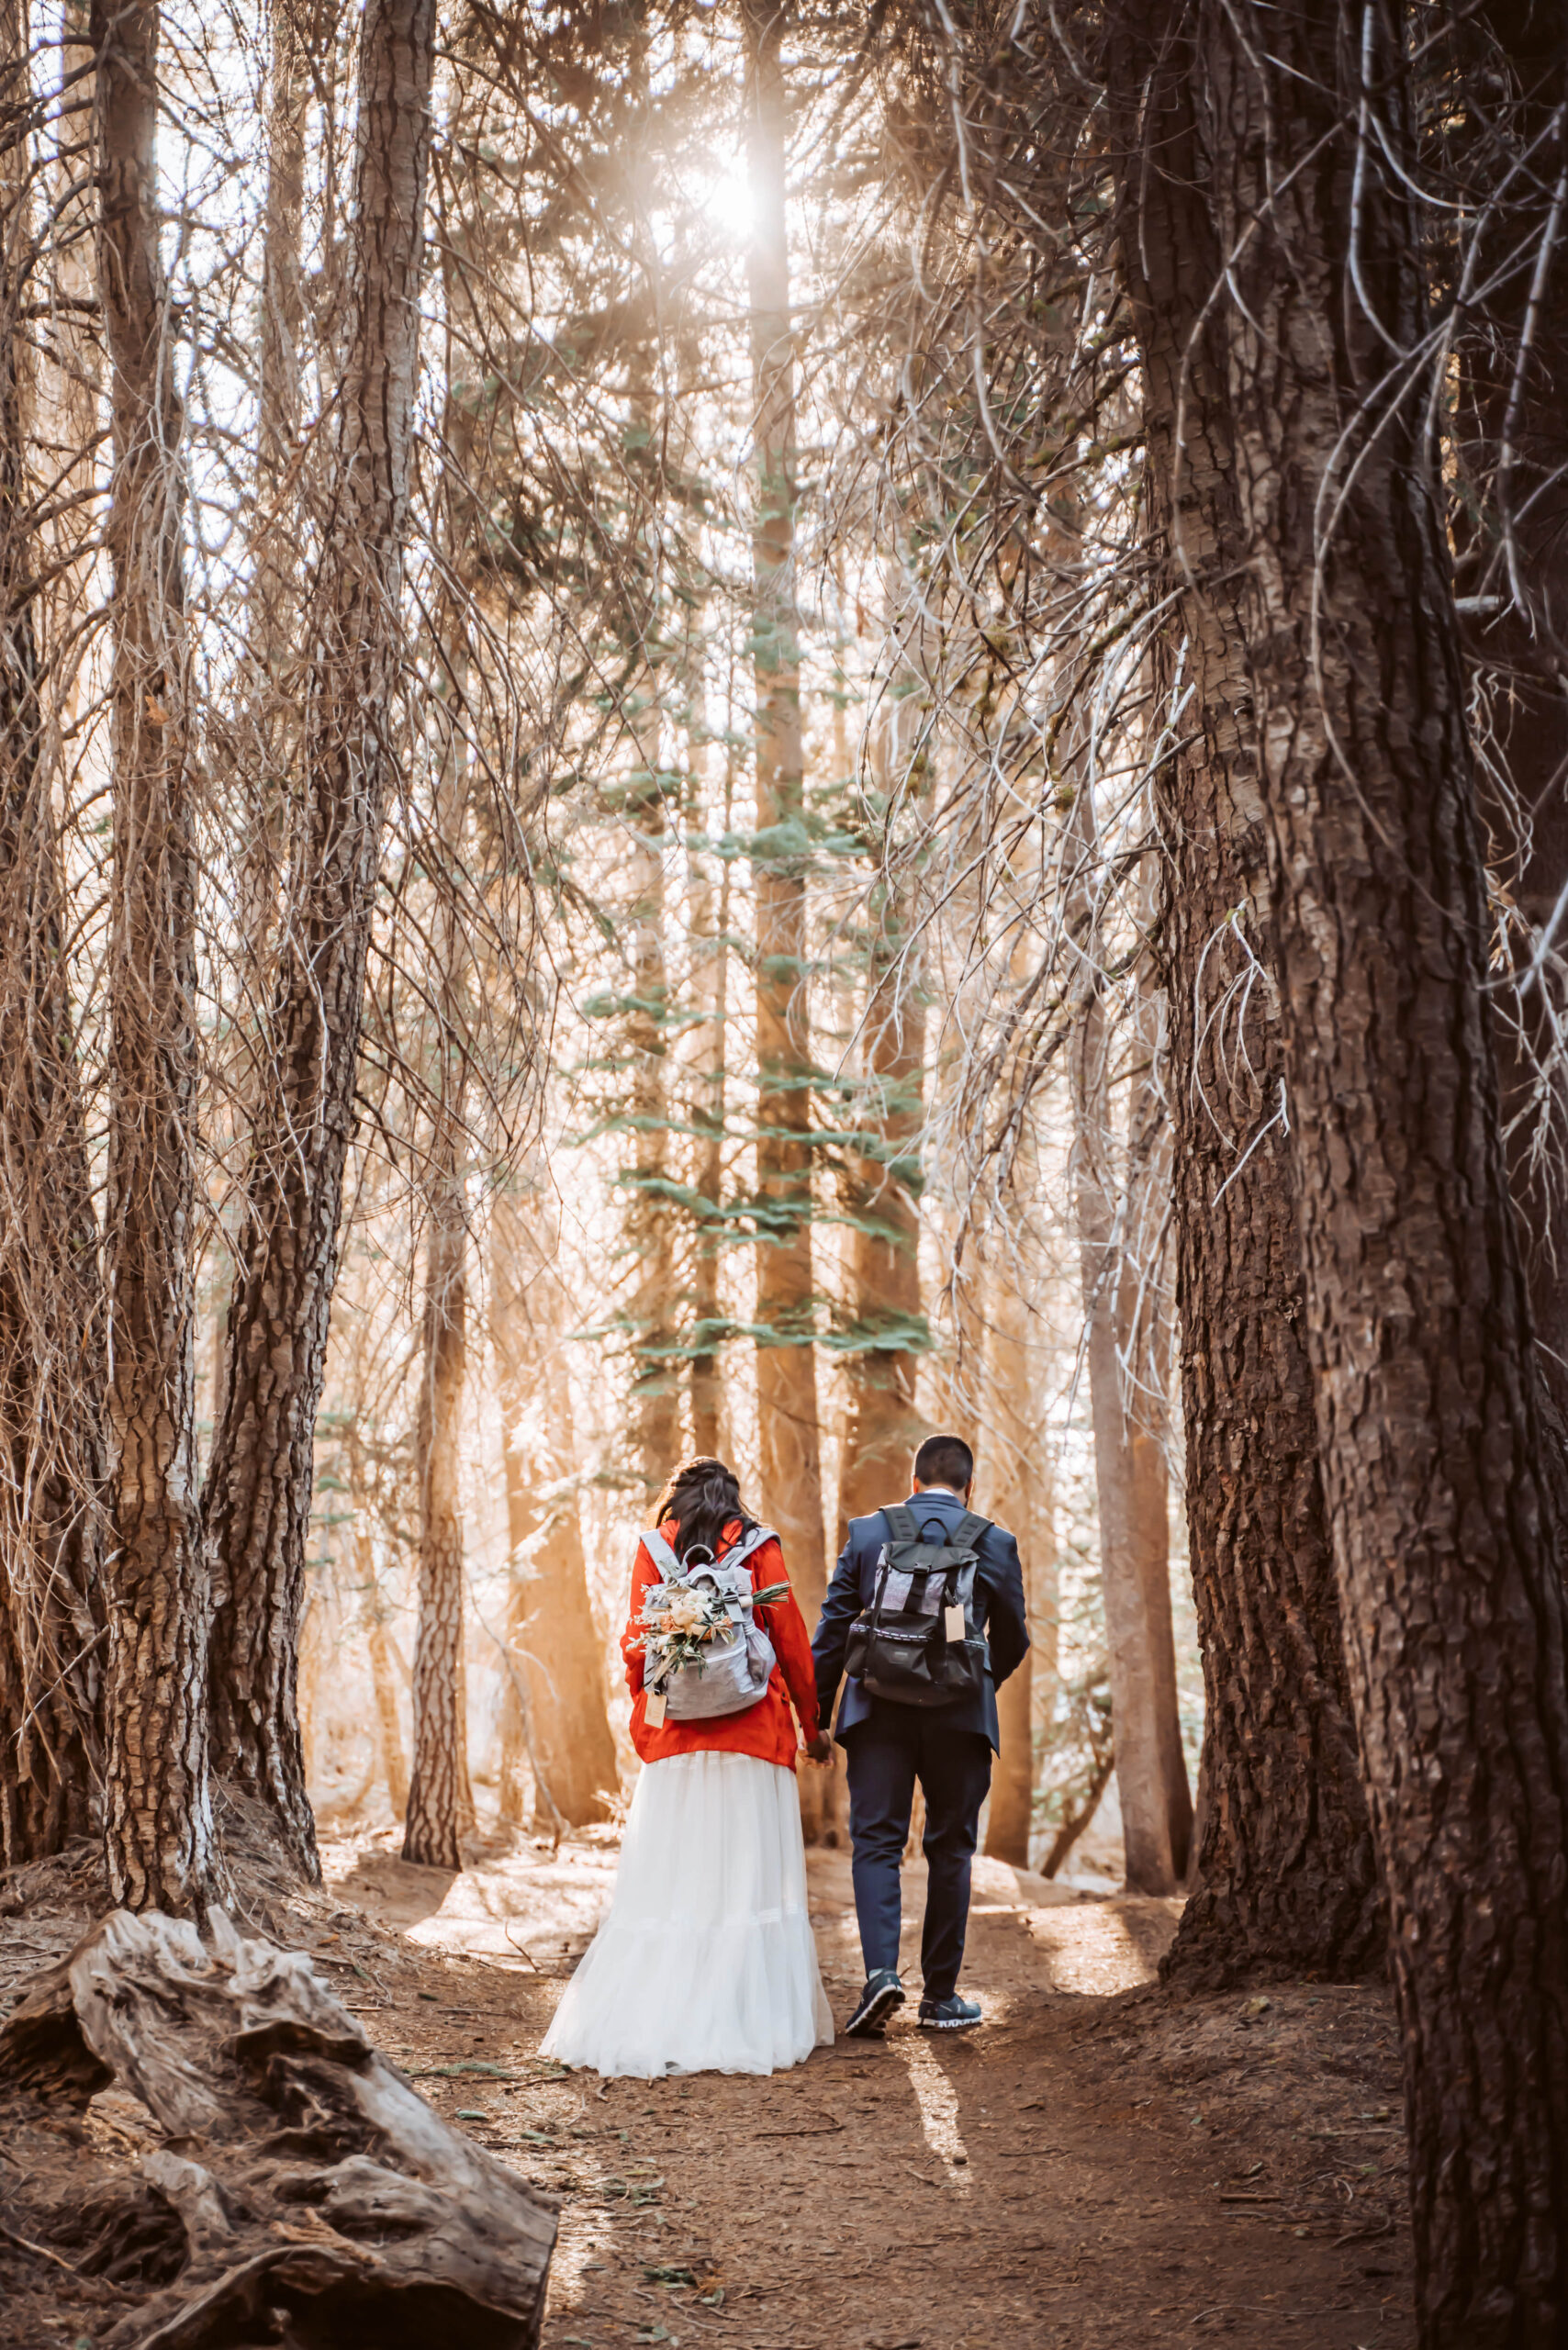 A wedding couple hiking in the trees for their adventure elopement in Yosemite